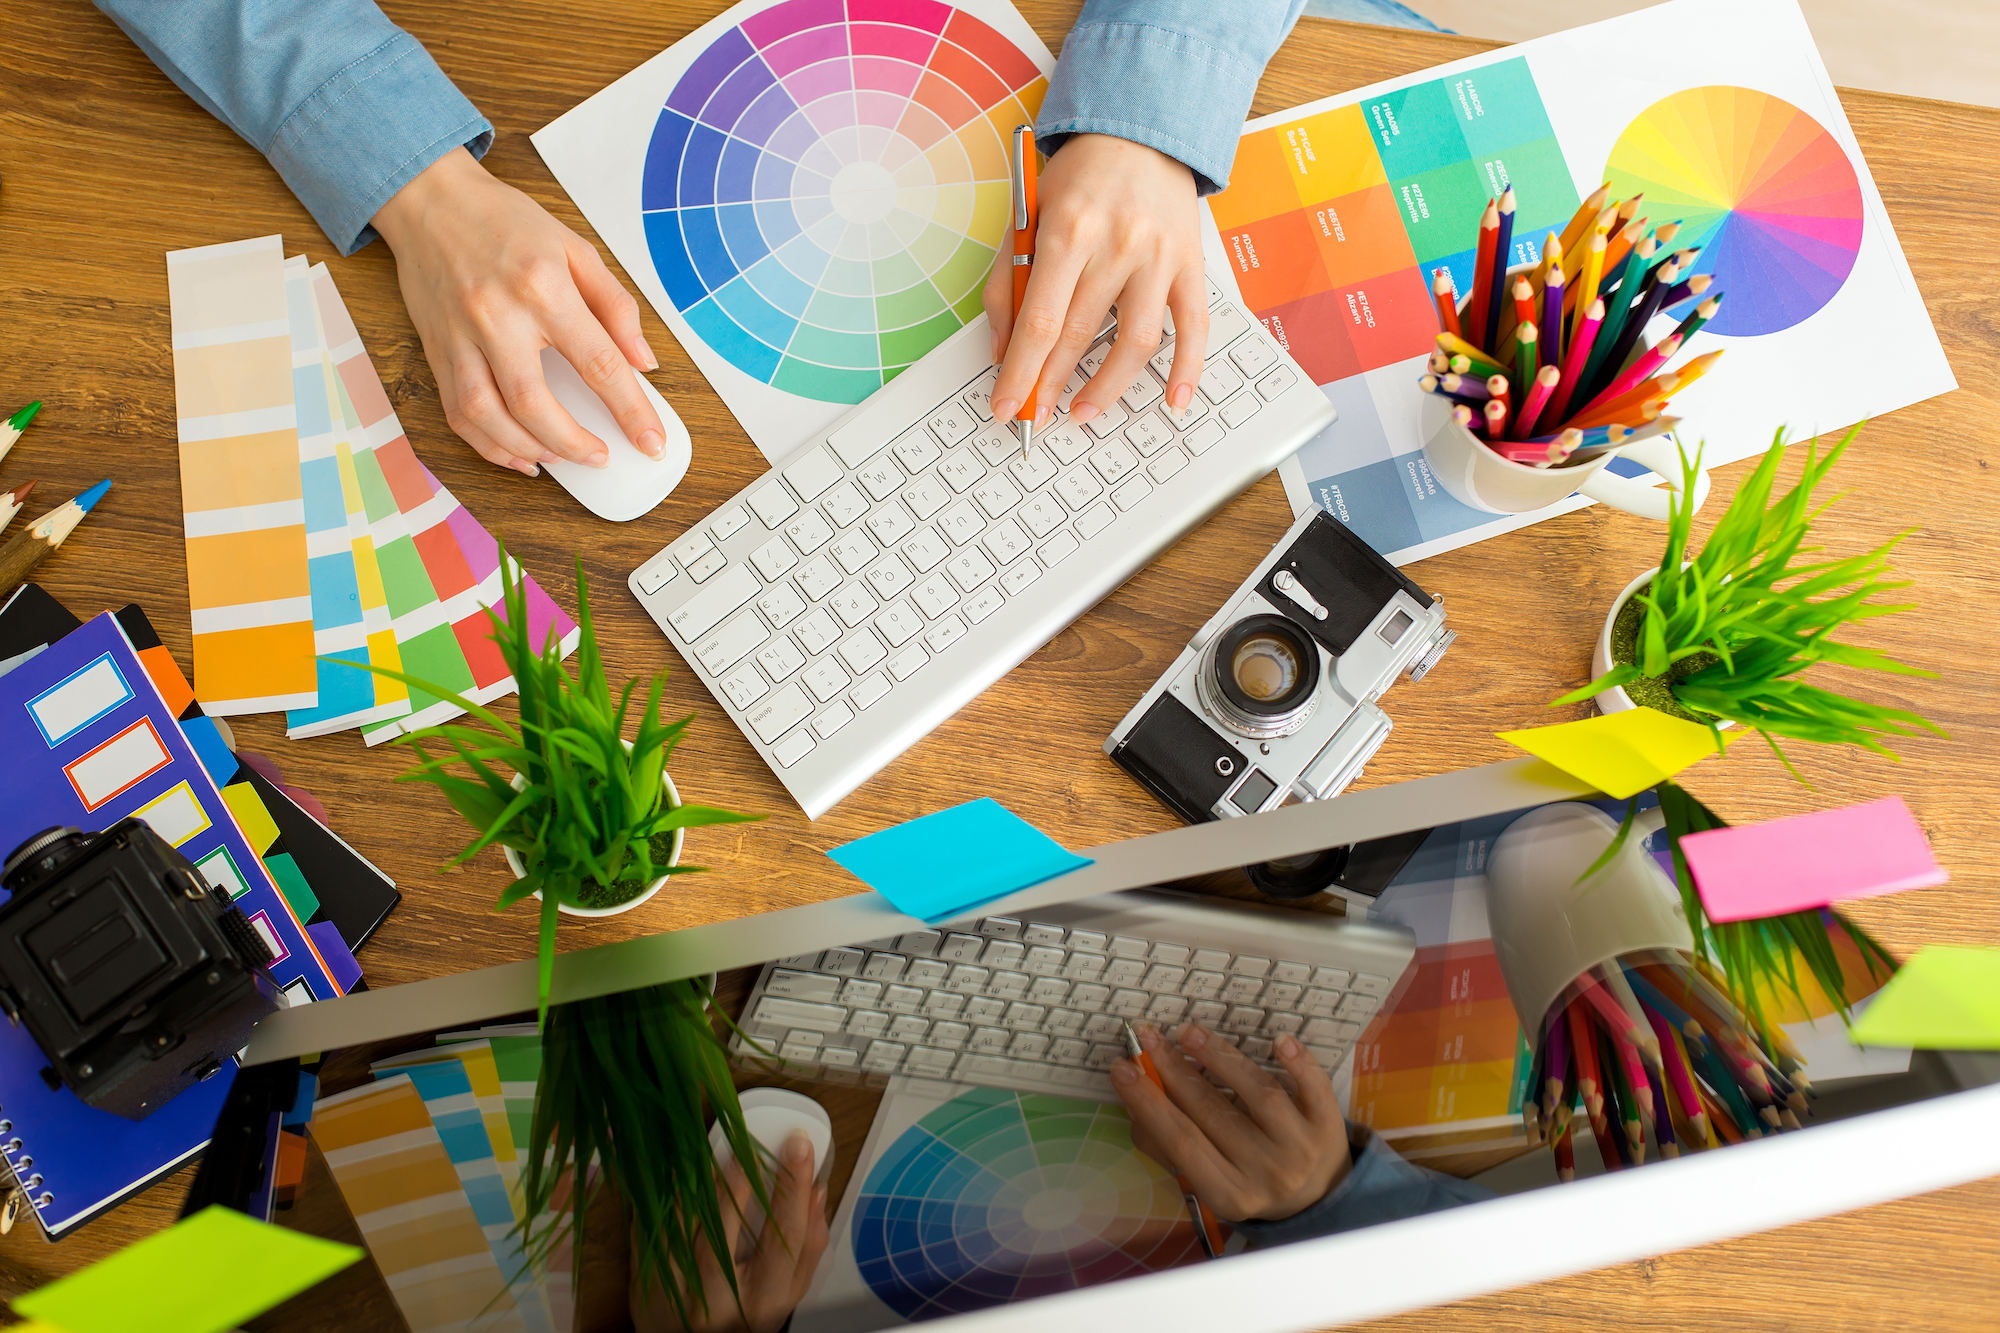 An image of a graphic designer at work is shown.